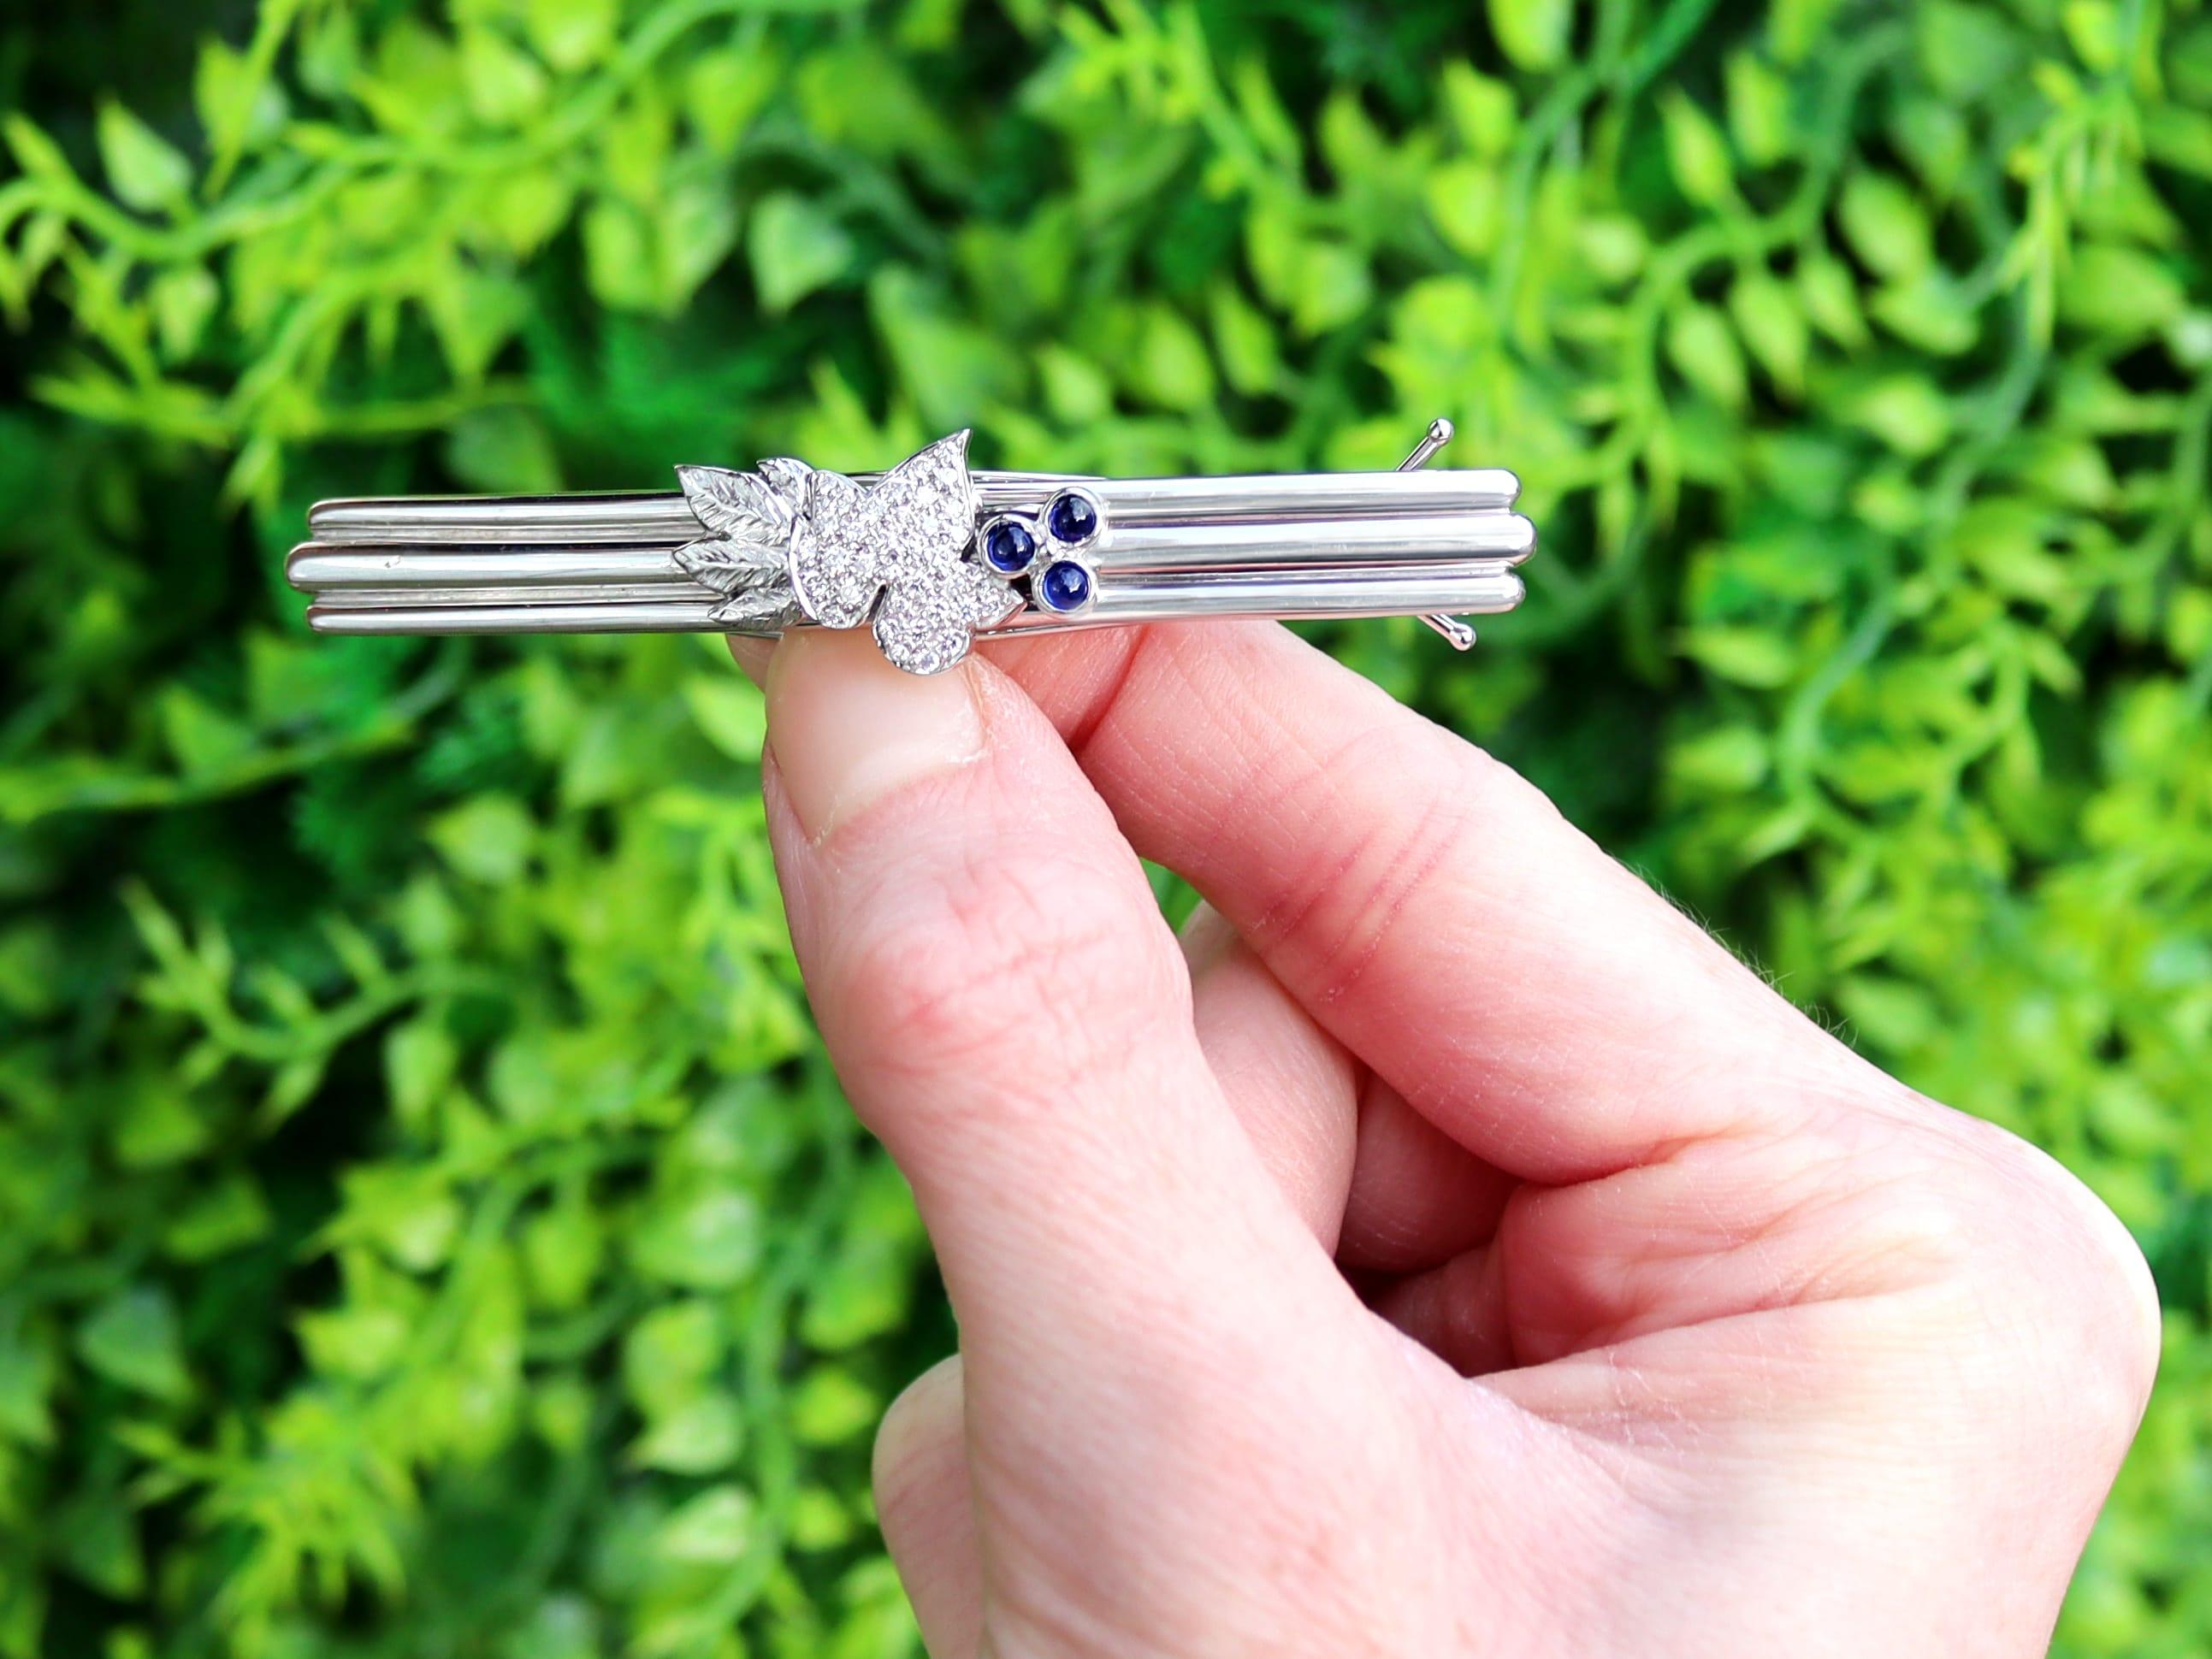 A fine and impressive vintage 0.28 carat sapphire and 0.34 carat diamond and 18 karat white gold hair clip; part of our diverse vintage sapphire jewelry collections.

This fine and impressive sapphire and diamond hair clip/barrette has been crafted